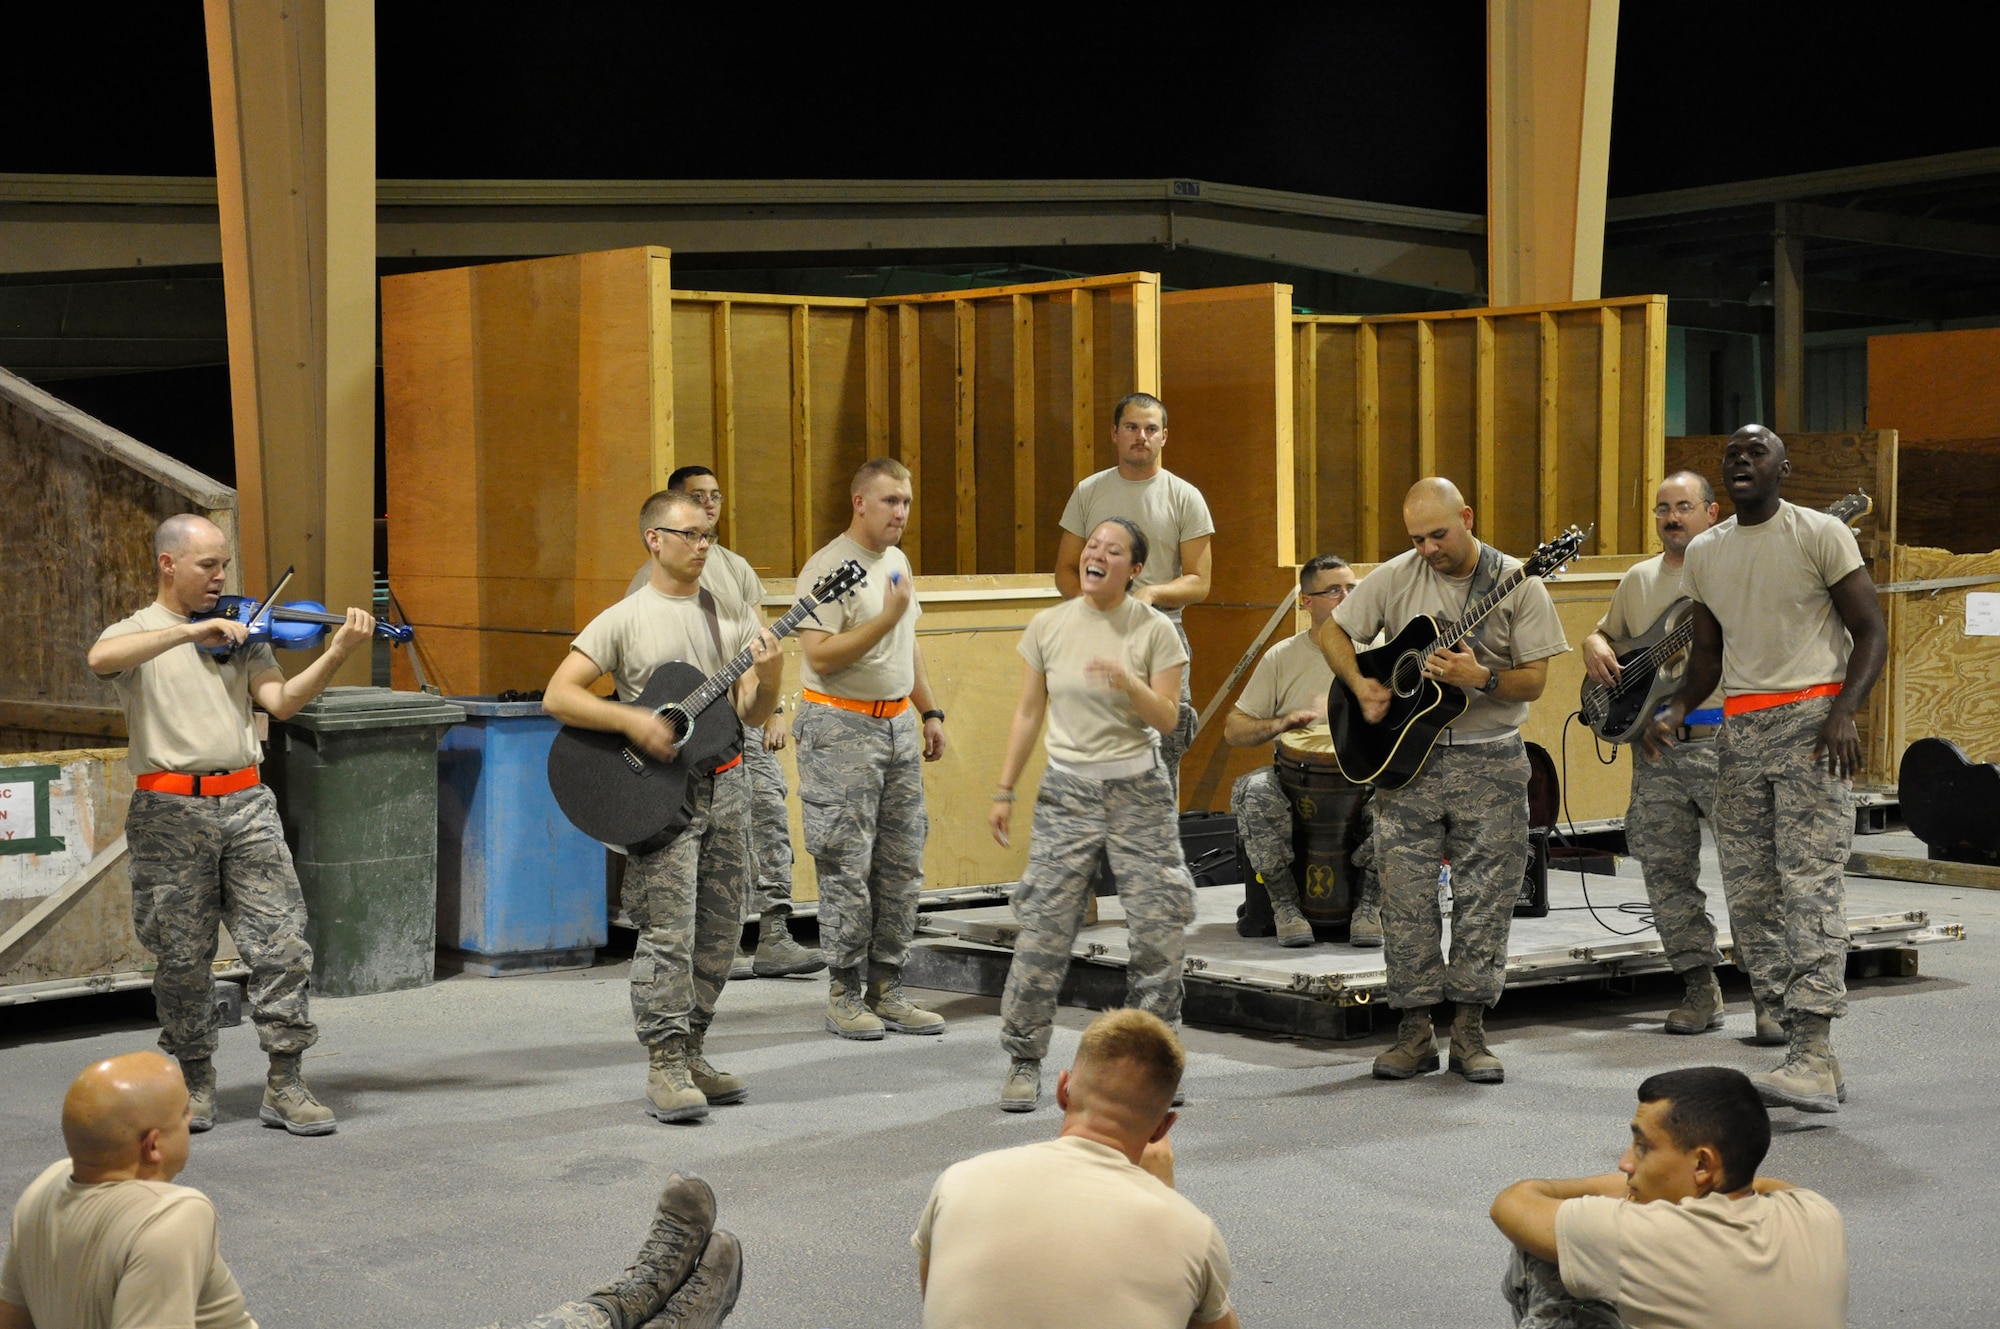 Sidewinder performs a half-hour acoustic set for 8th Expeditionary Air Mobility Squadron Airmen working the night shift at the passenger terminal pallet yard Aug. 8, 2011, in Southwest Asia. Video from that night was uploaded to YouTube, went viral, and now has over 400,000 views. (U.S. Air Force by Staff Sgt Chad Shaver)